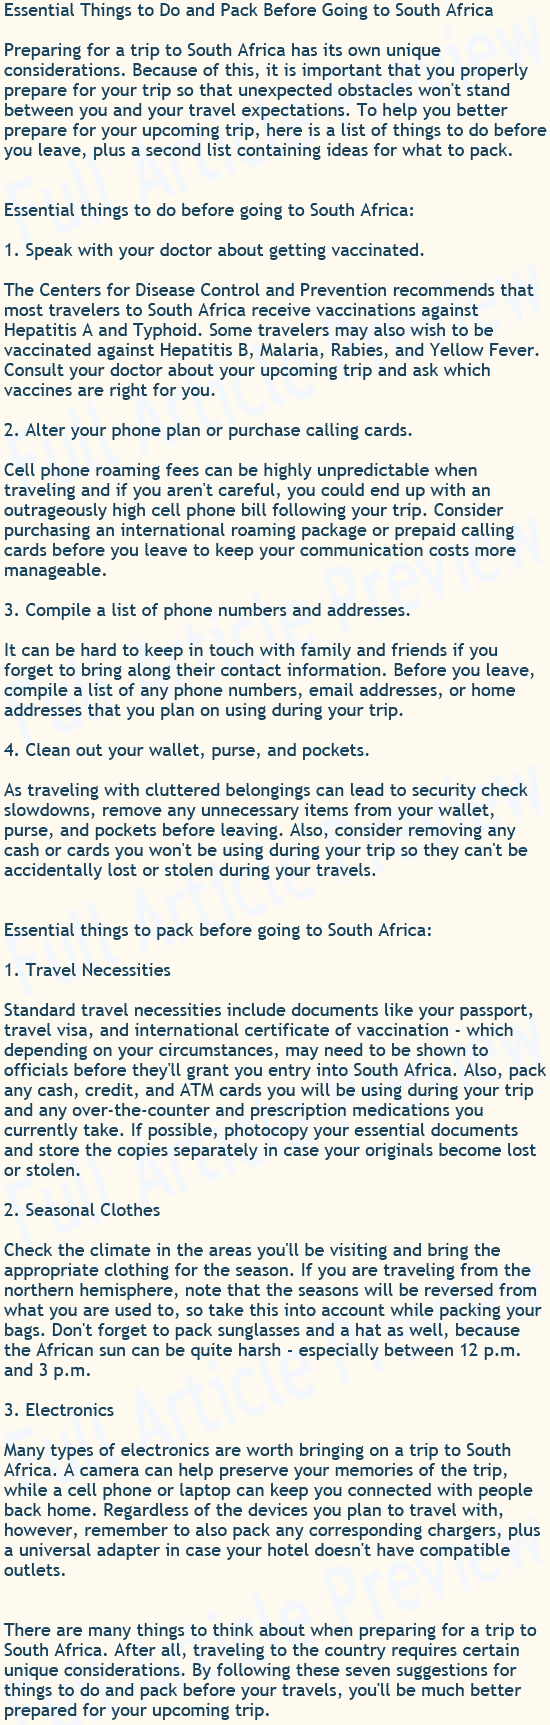 Buy this article about traveling to South Africa for your website.